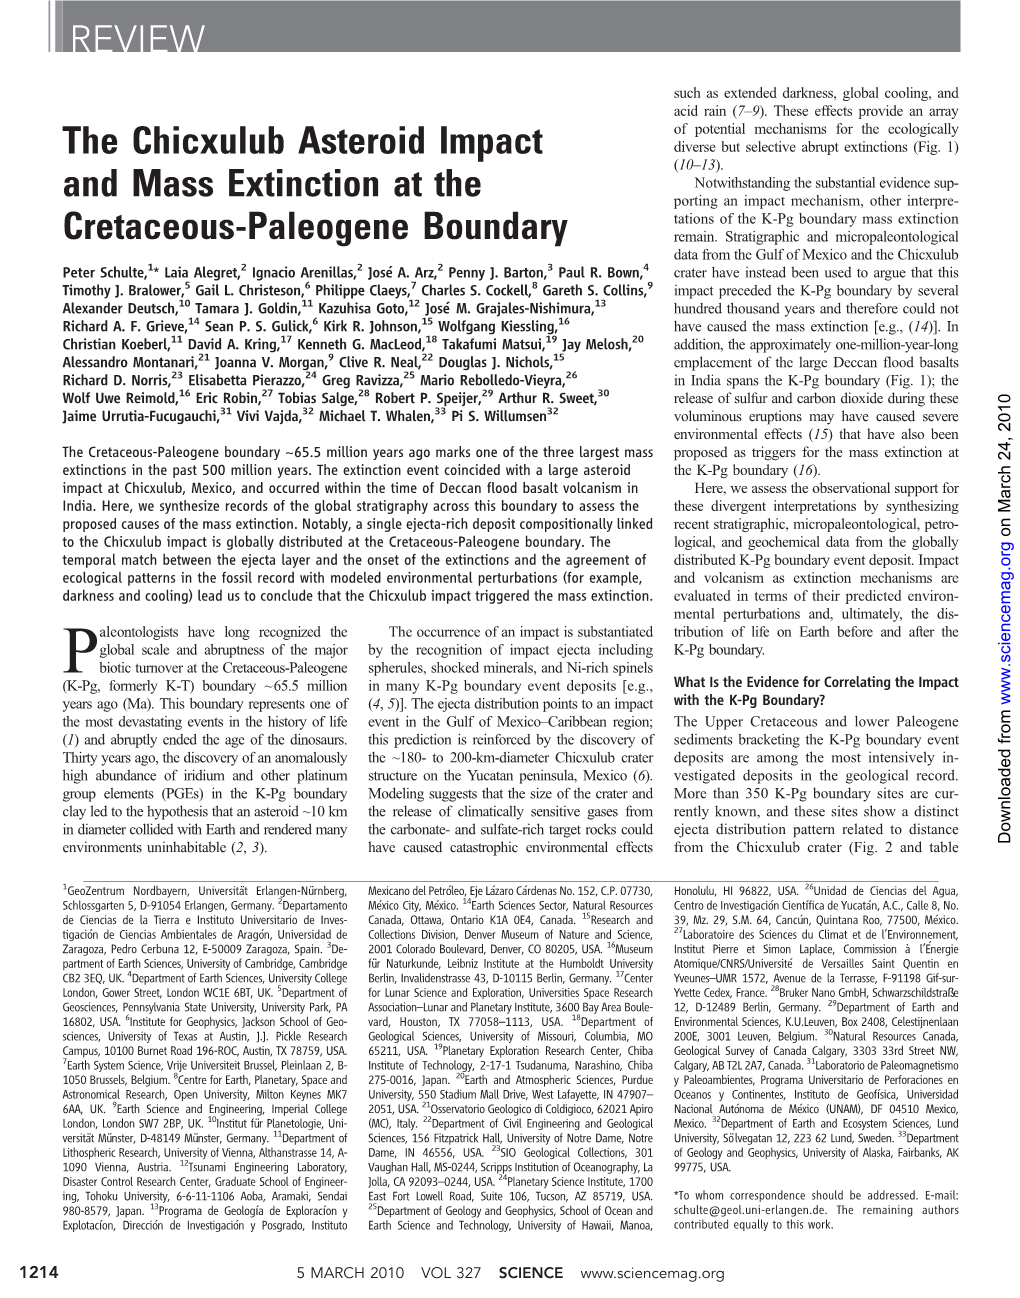 The Chicxulub Asteroid Impact and Mass Extinction at the Cretaceous-Paleogene Boundary REVIEW